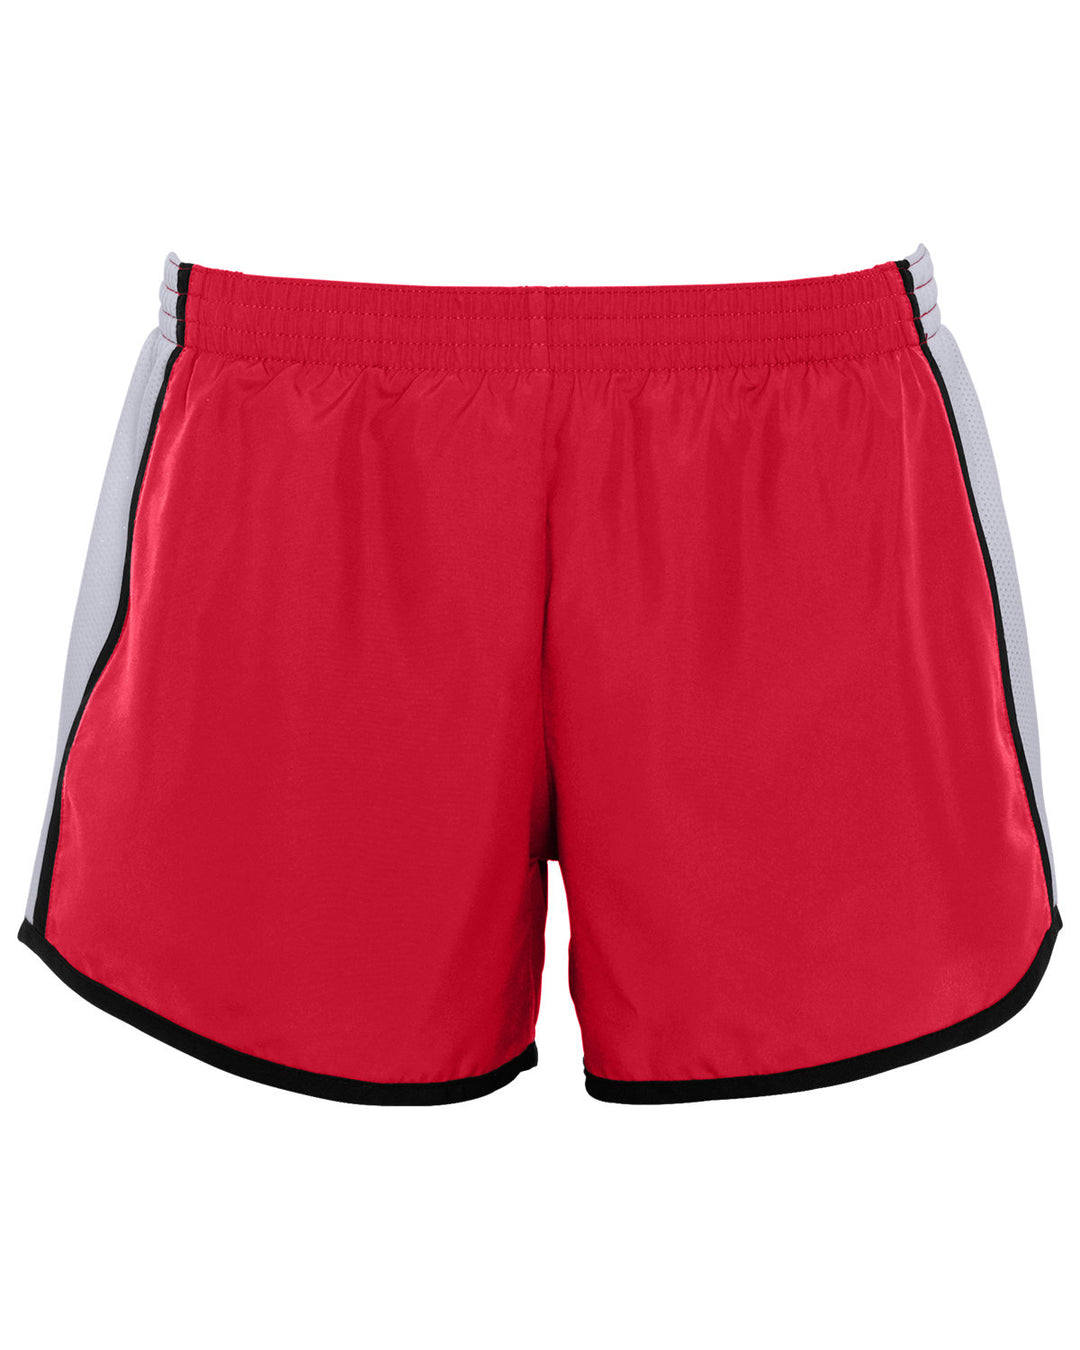 Women's Hingham Track and Field Shorts (1265)